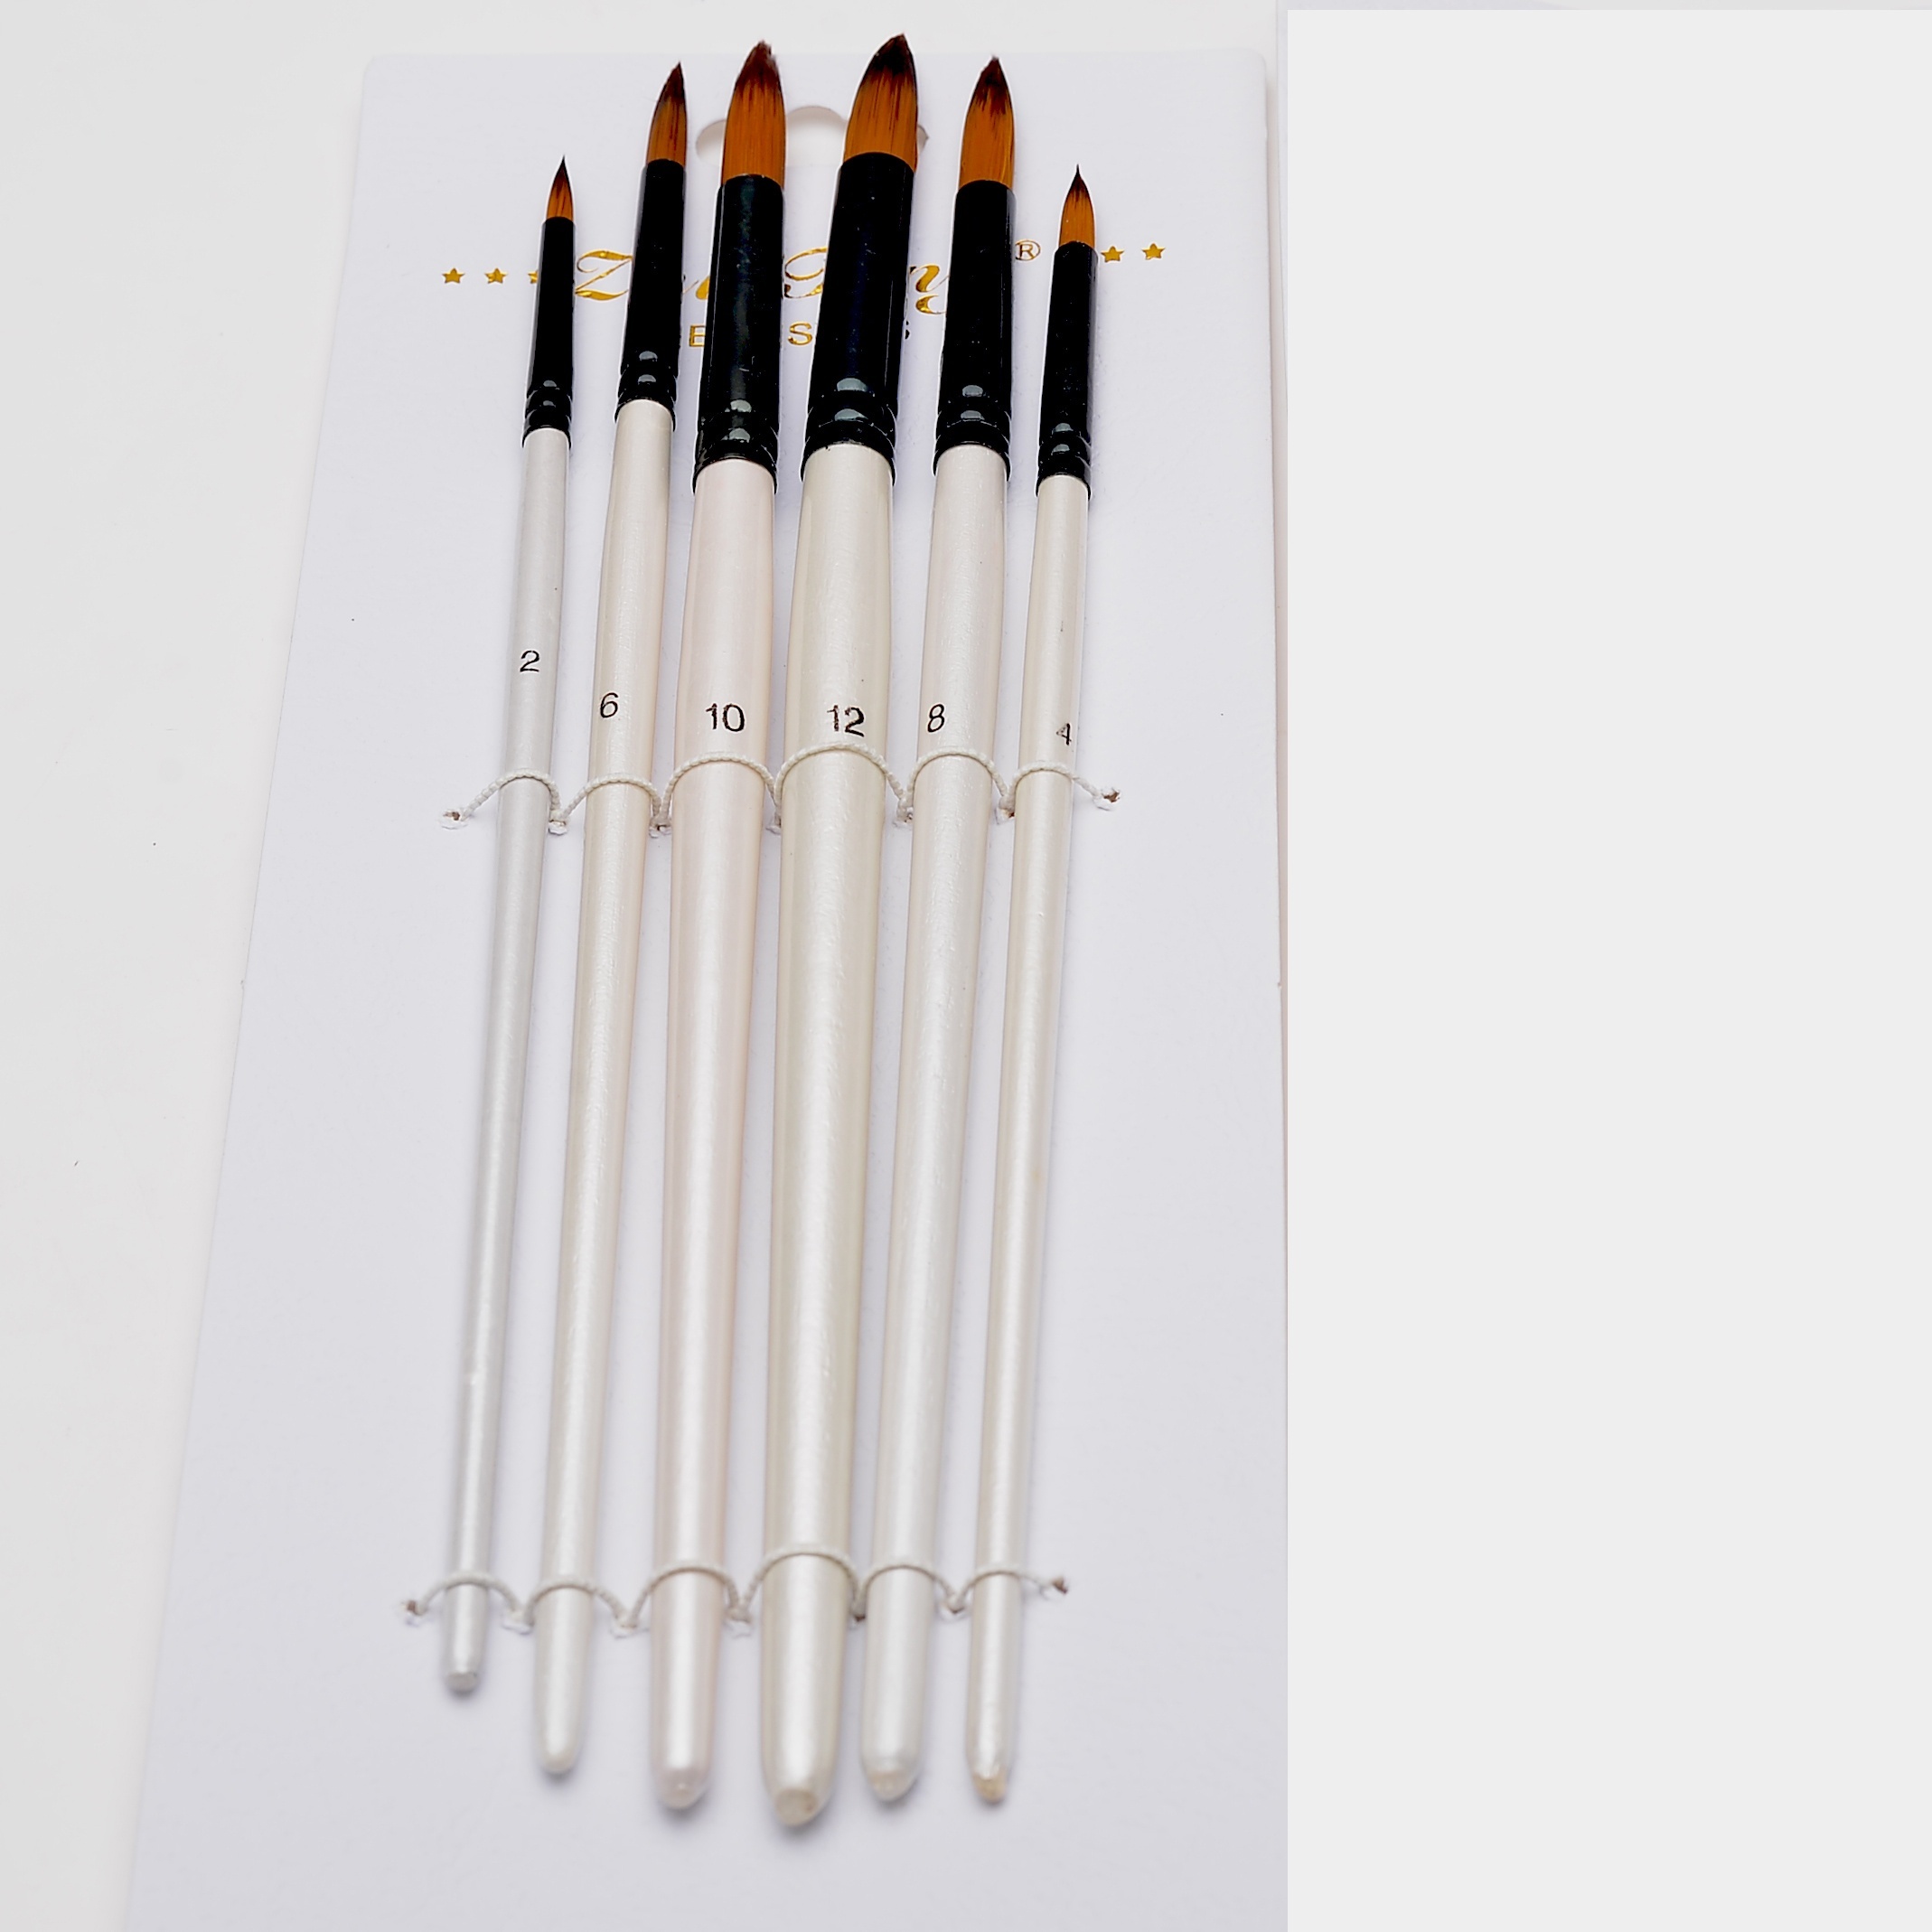 Art Paint Brushes for Acrylic Painting Watercolor Oil - Body Face